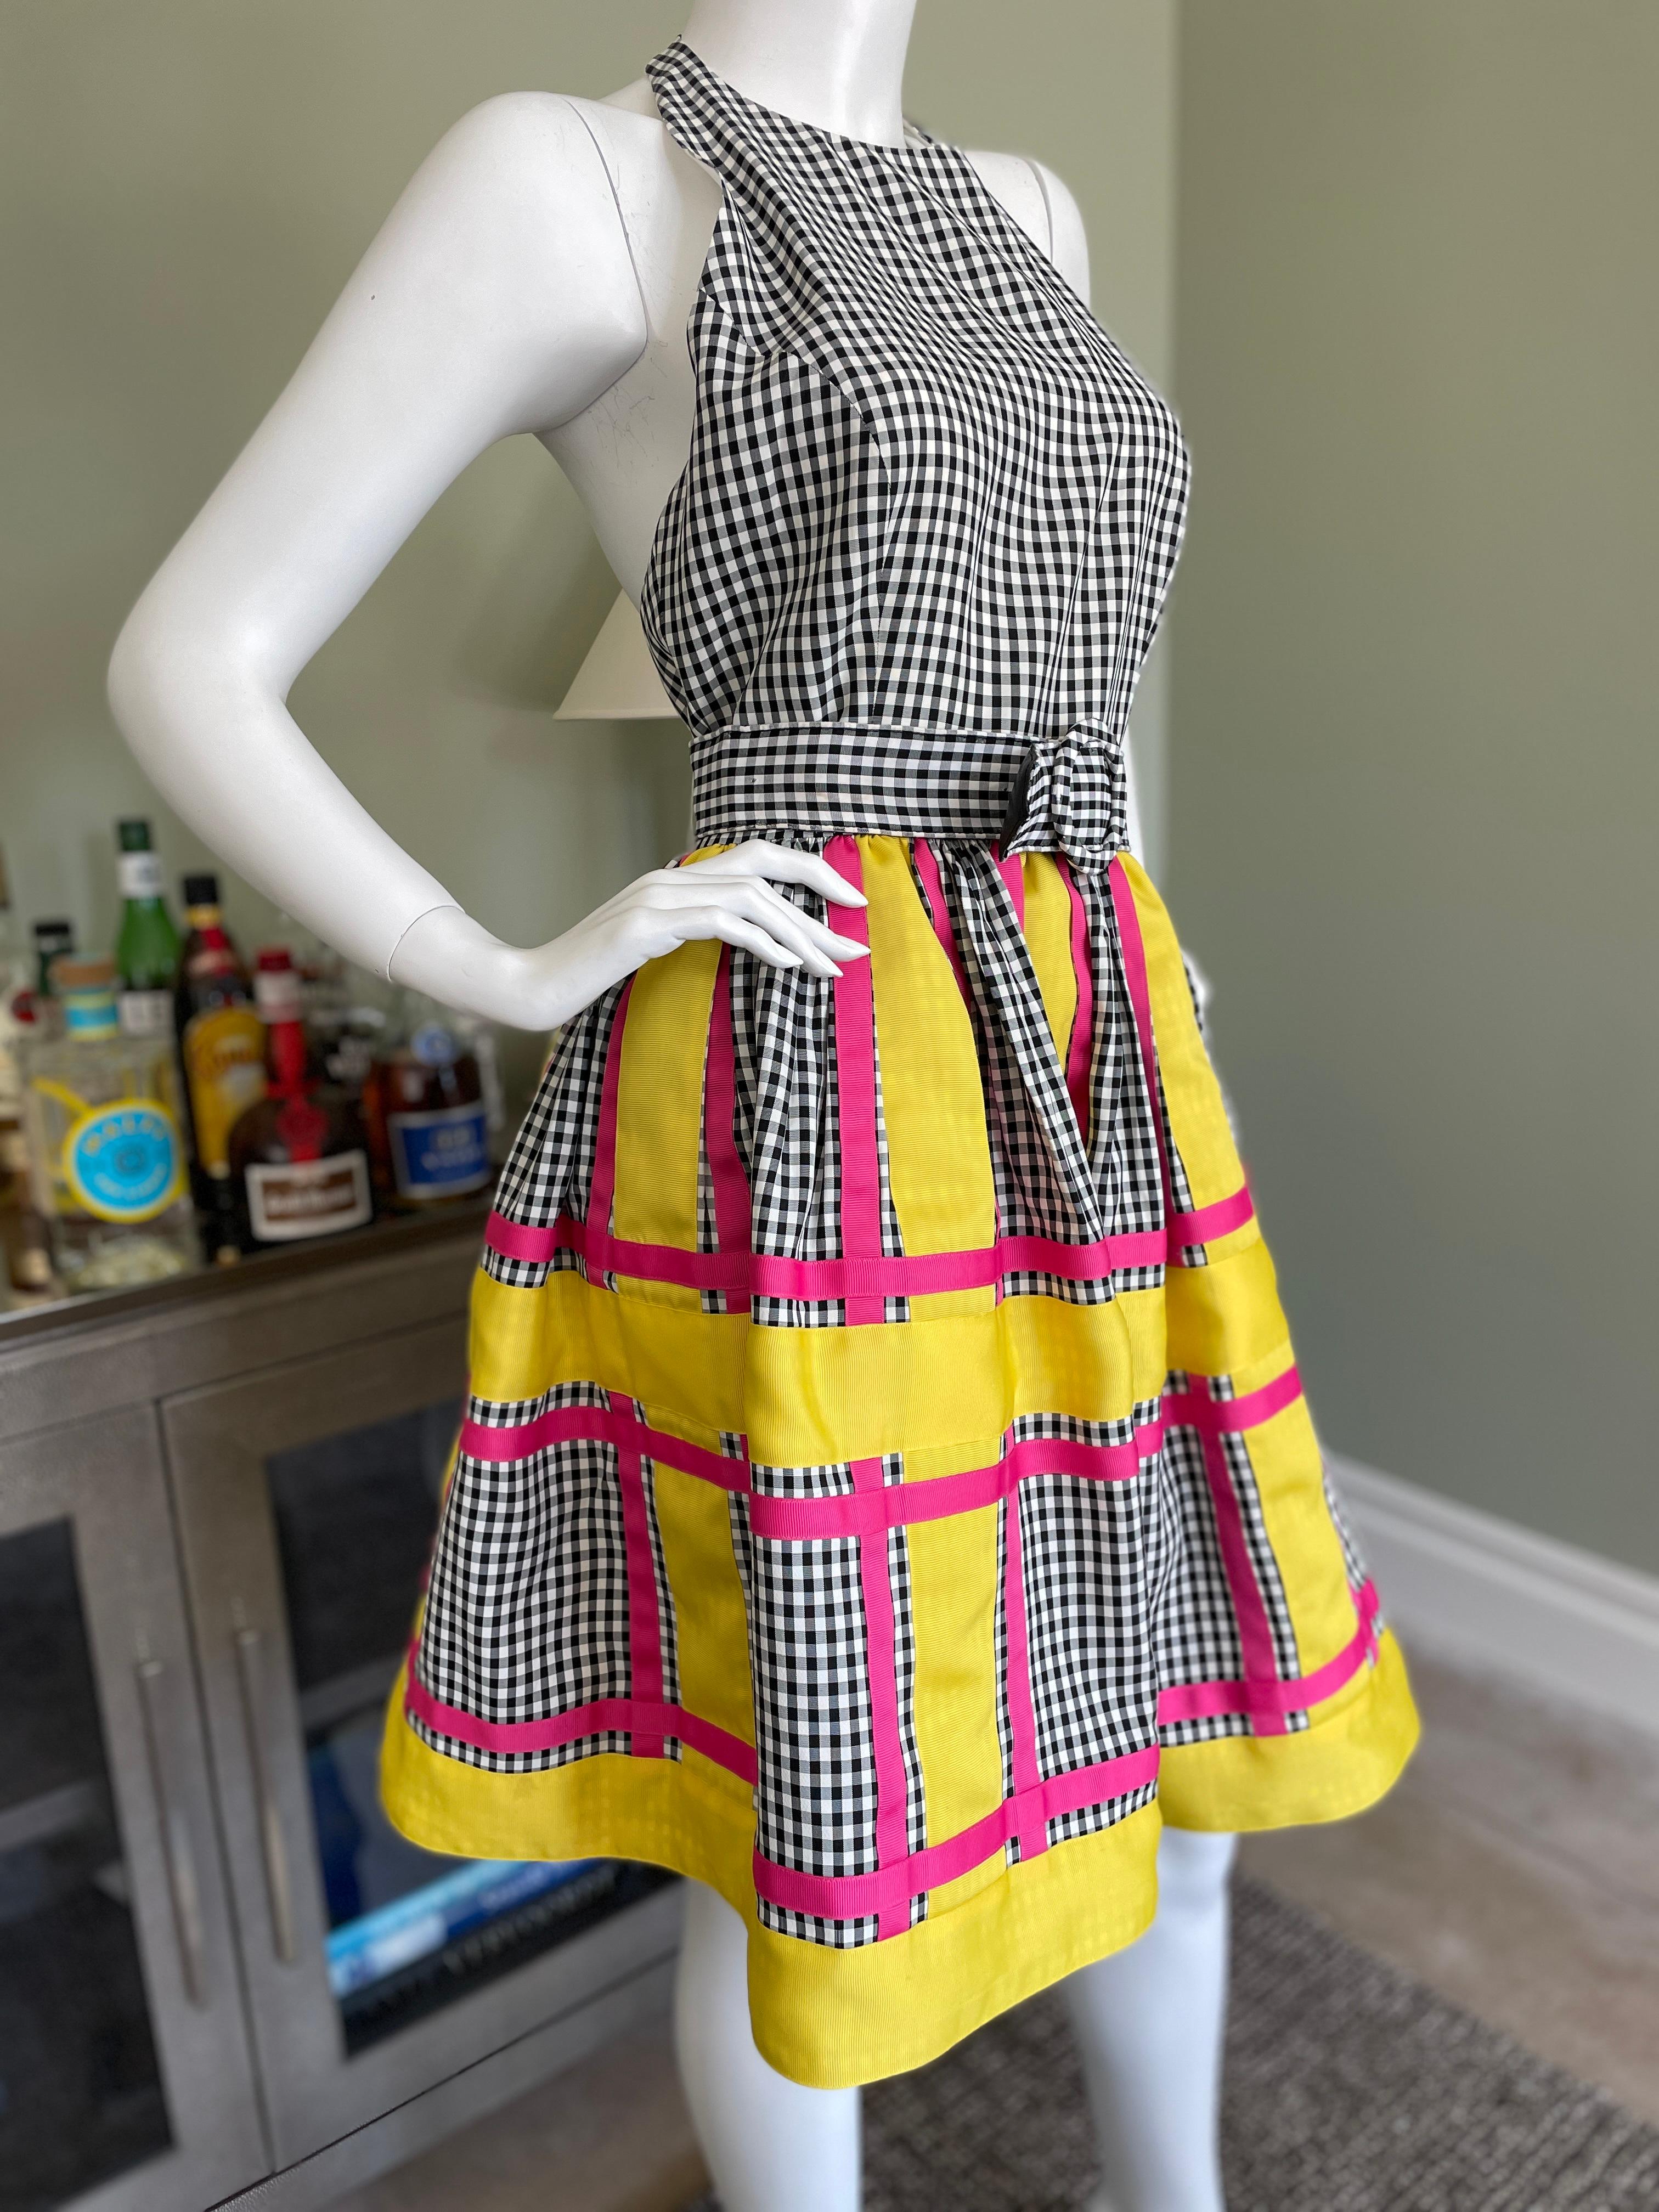 Bill Blass 1980's Gingham Print Halter Dress In Excellent Condition For Sale In Cloverdale, CA